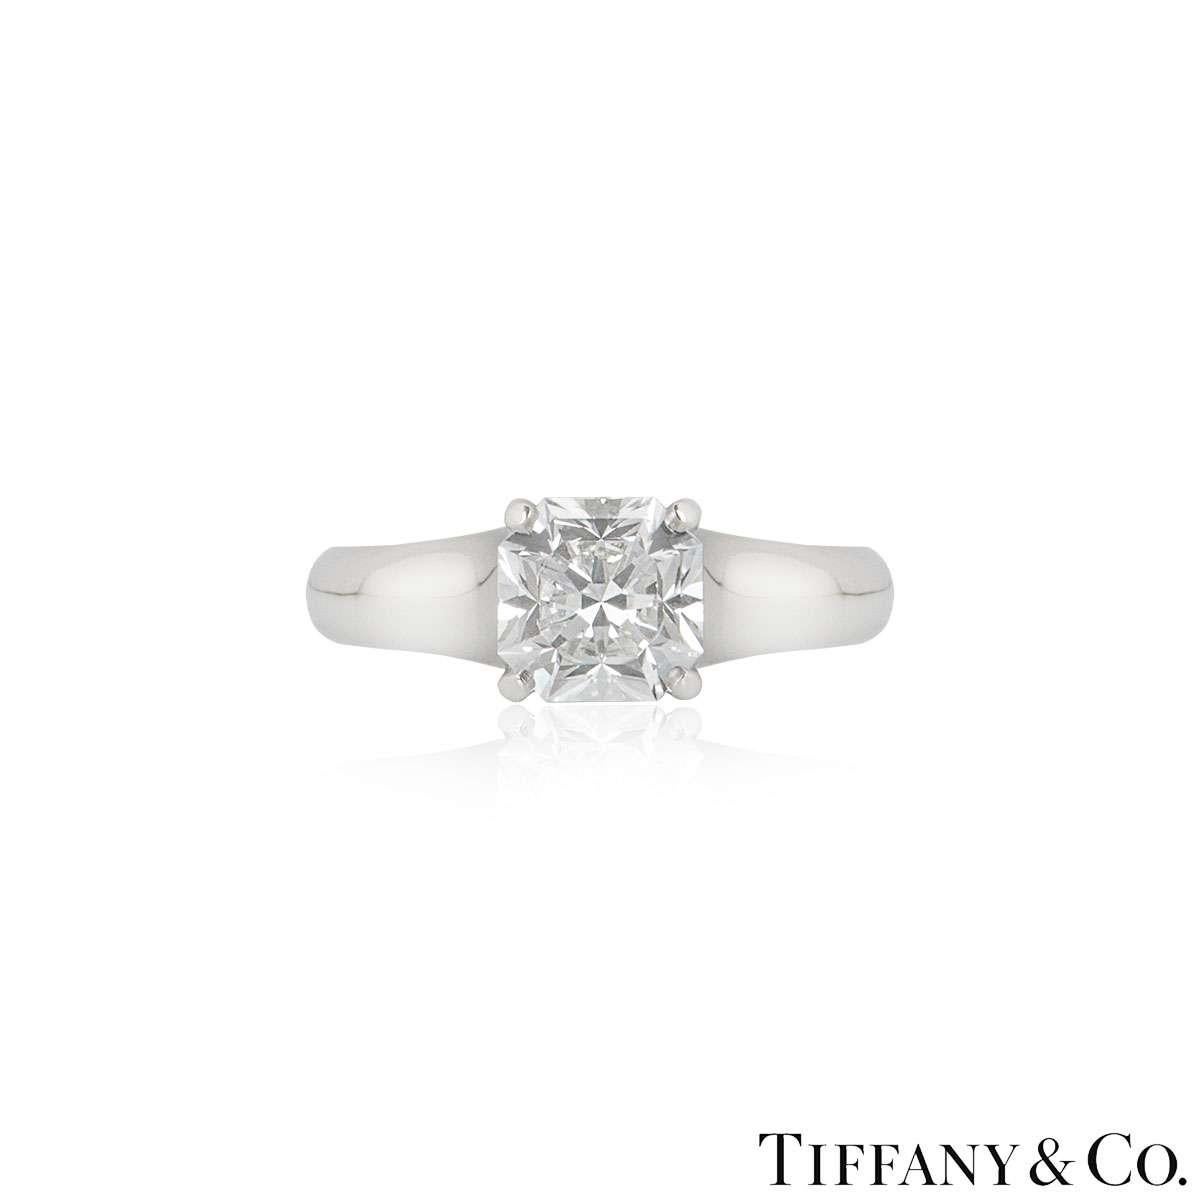 A stunning platinum Tiffany & Co. diamond ring from the Lucida collection. The ring comprises of a Lucida cut diamond in a 4 claw setting with a weight of 1.27ct, E colour and VS1 clarity. The ring is a size UK K / EU 50 / US 5.25 but can be